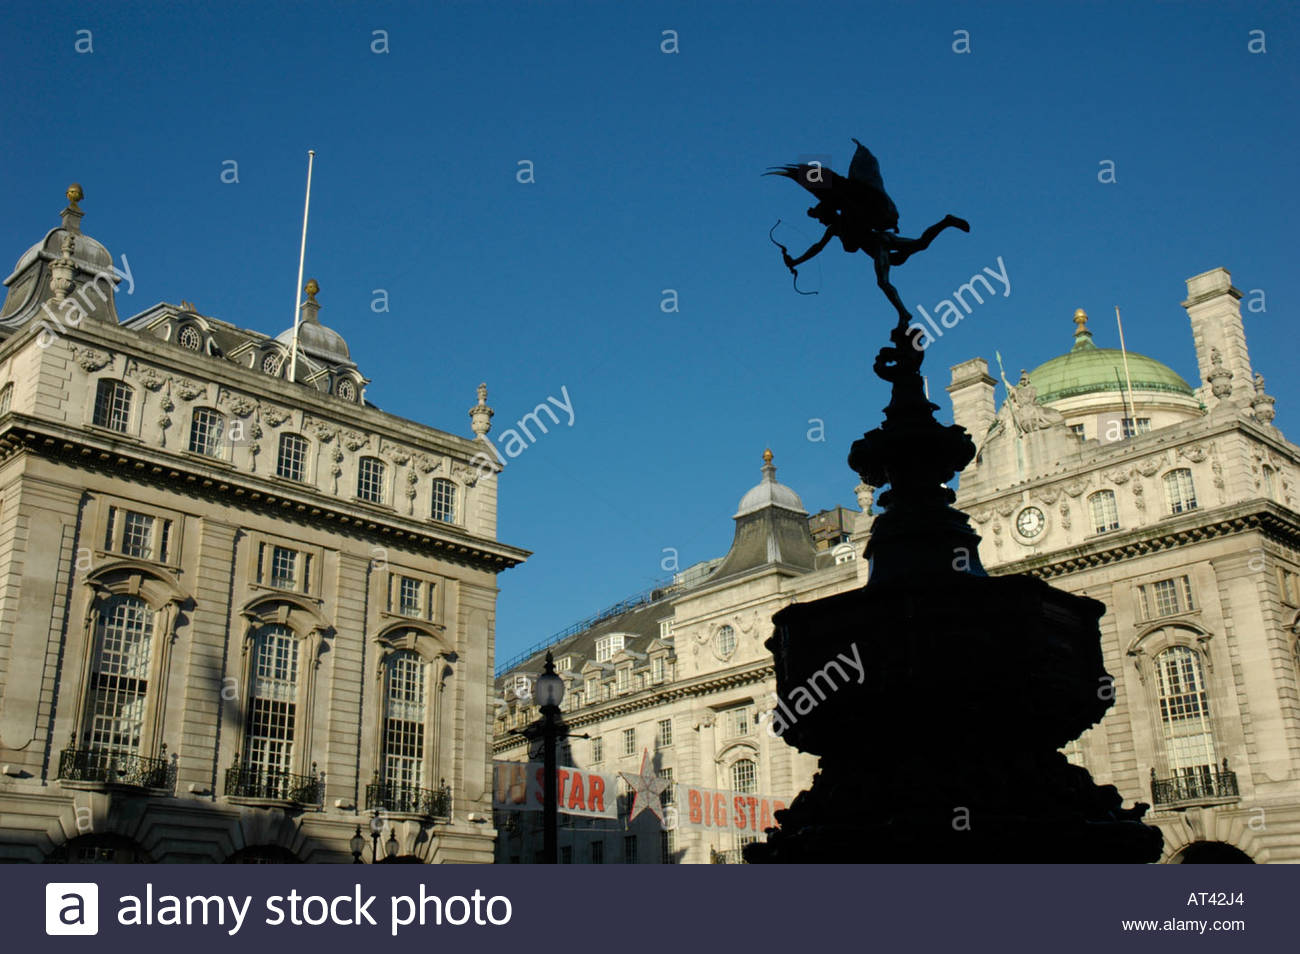 Silhouette Of Eros Statue With Victorian Buildings In The